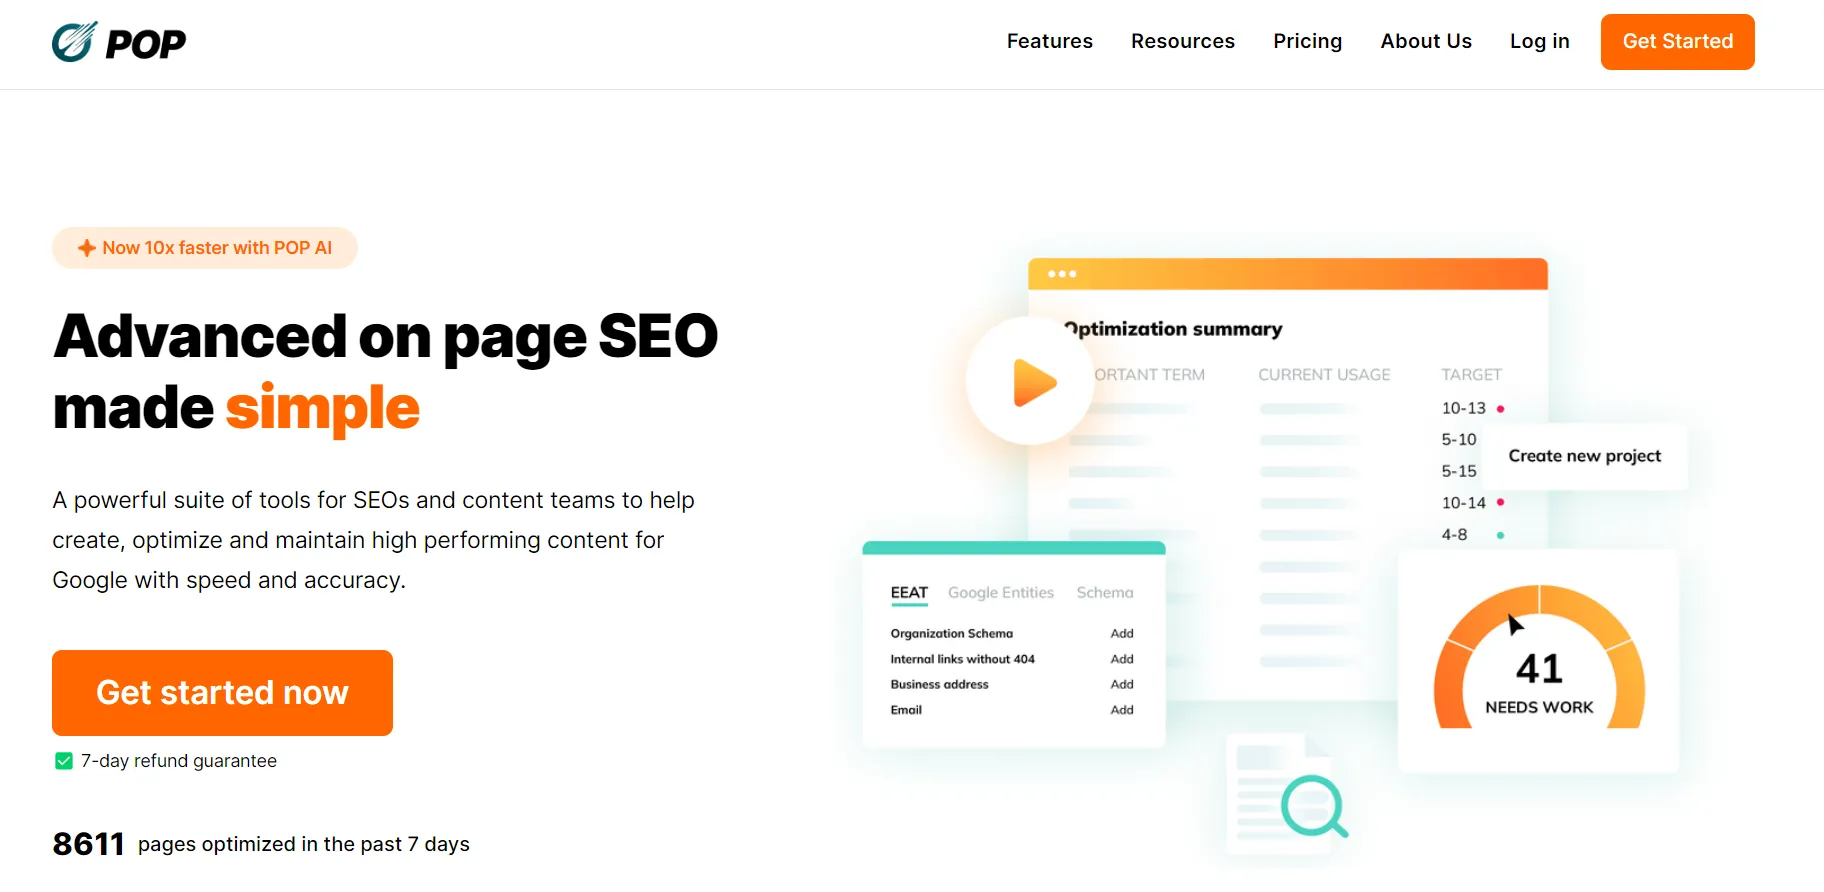 Page Optimizer Pro Homepage